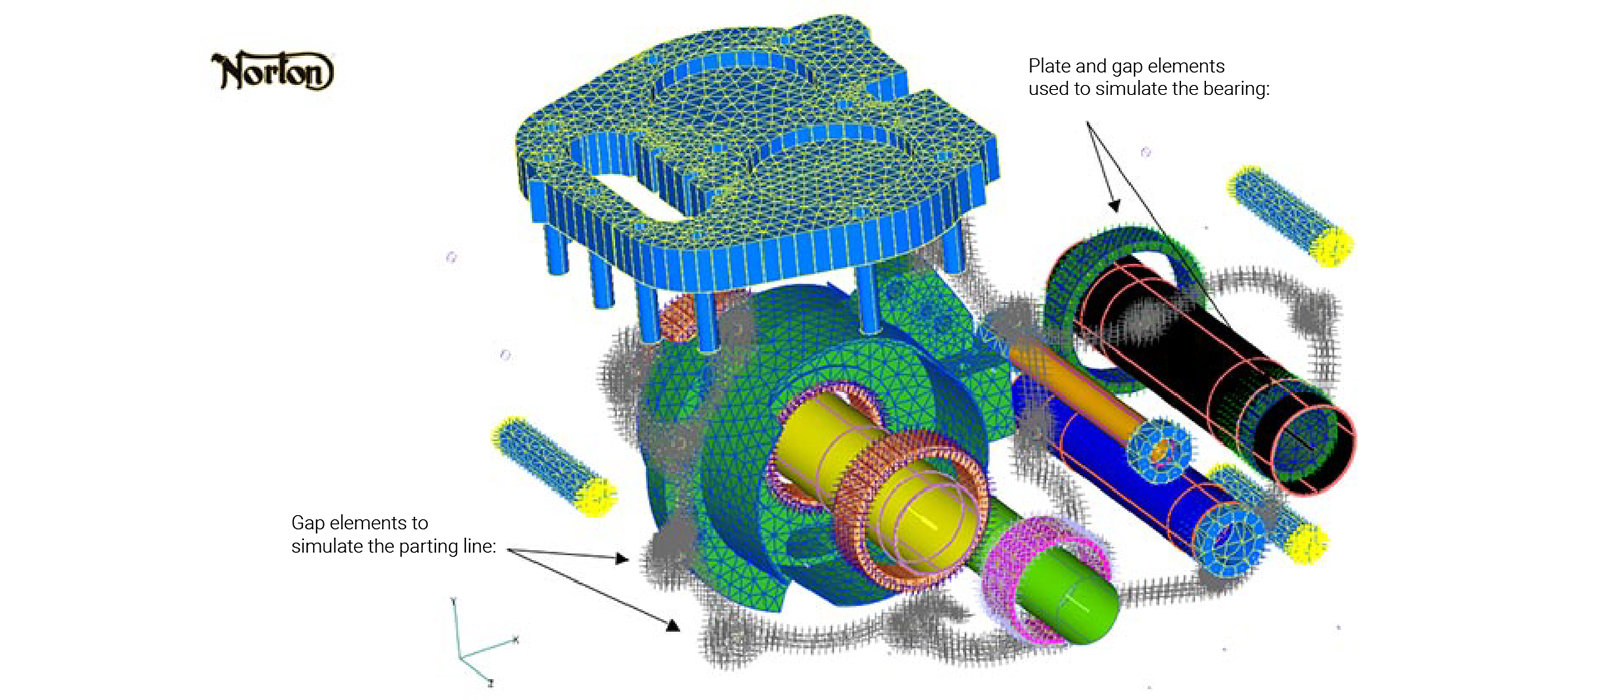 Norton Crankcase FEA model built using Femap and analyzed with Simcenter Nastran - FEA Services